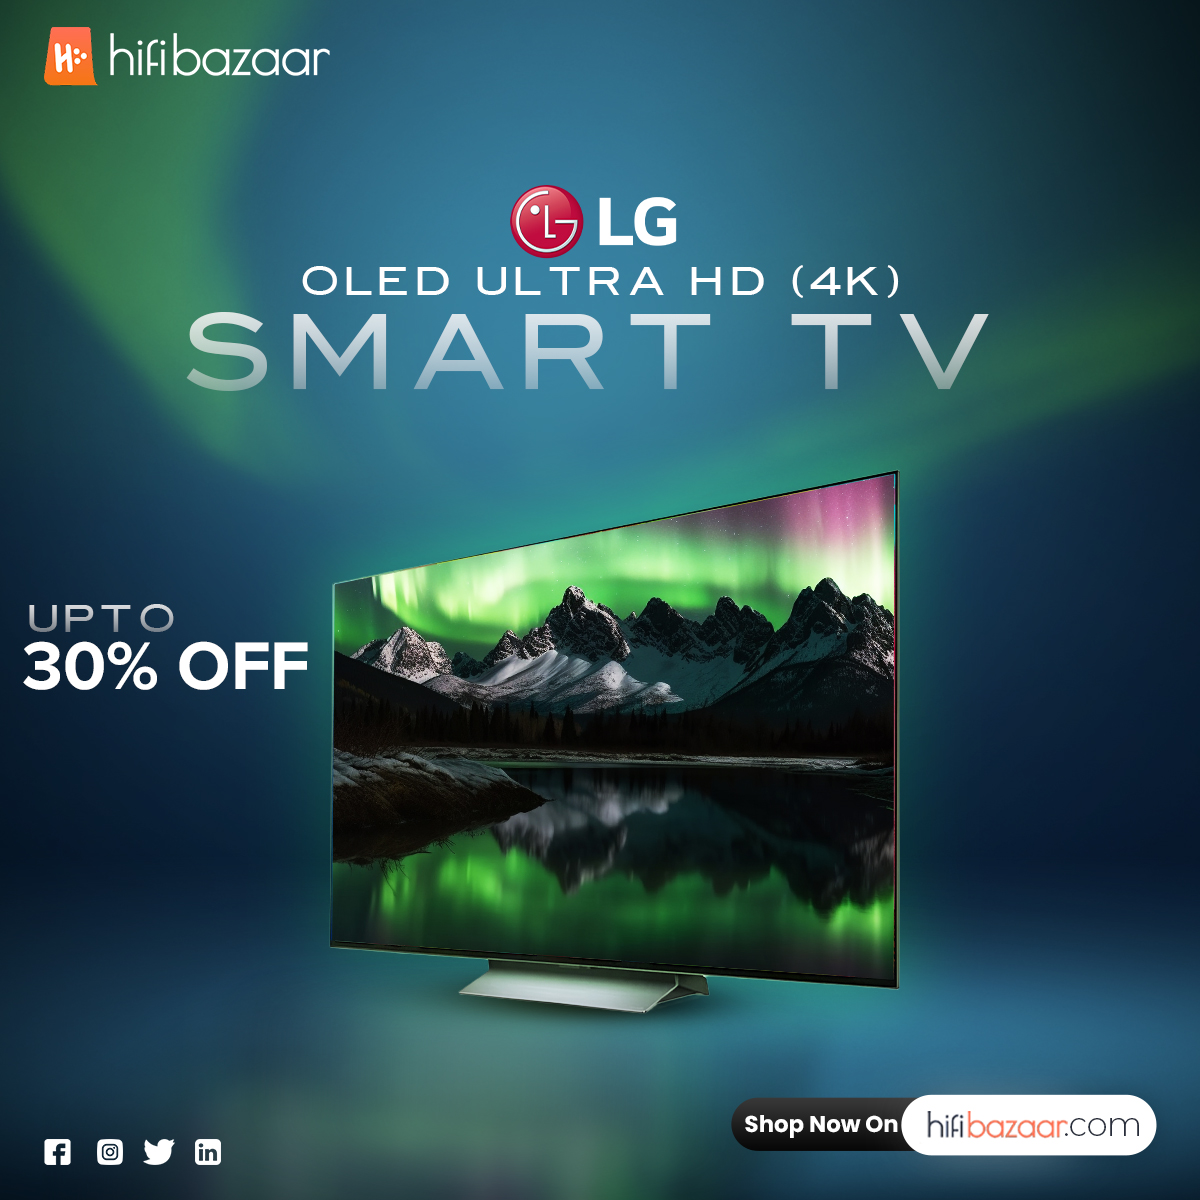 Experience Entertainment in Stunning Clarity with the LG Ultra HD 4K Smart TV! 📺✨
Buy Now:🛒✅ shorturl.at/mnJS3
.
.
#LG4KSmartTV #ImmersiveEntertainment #VividColors #CinematicQuality #SmartFeatures #UpgradeYourViewing #UnforgettableMoments #ShopNow #hifibazaar